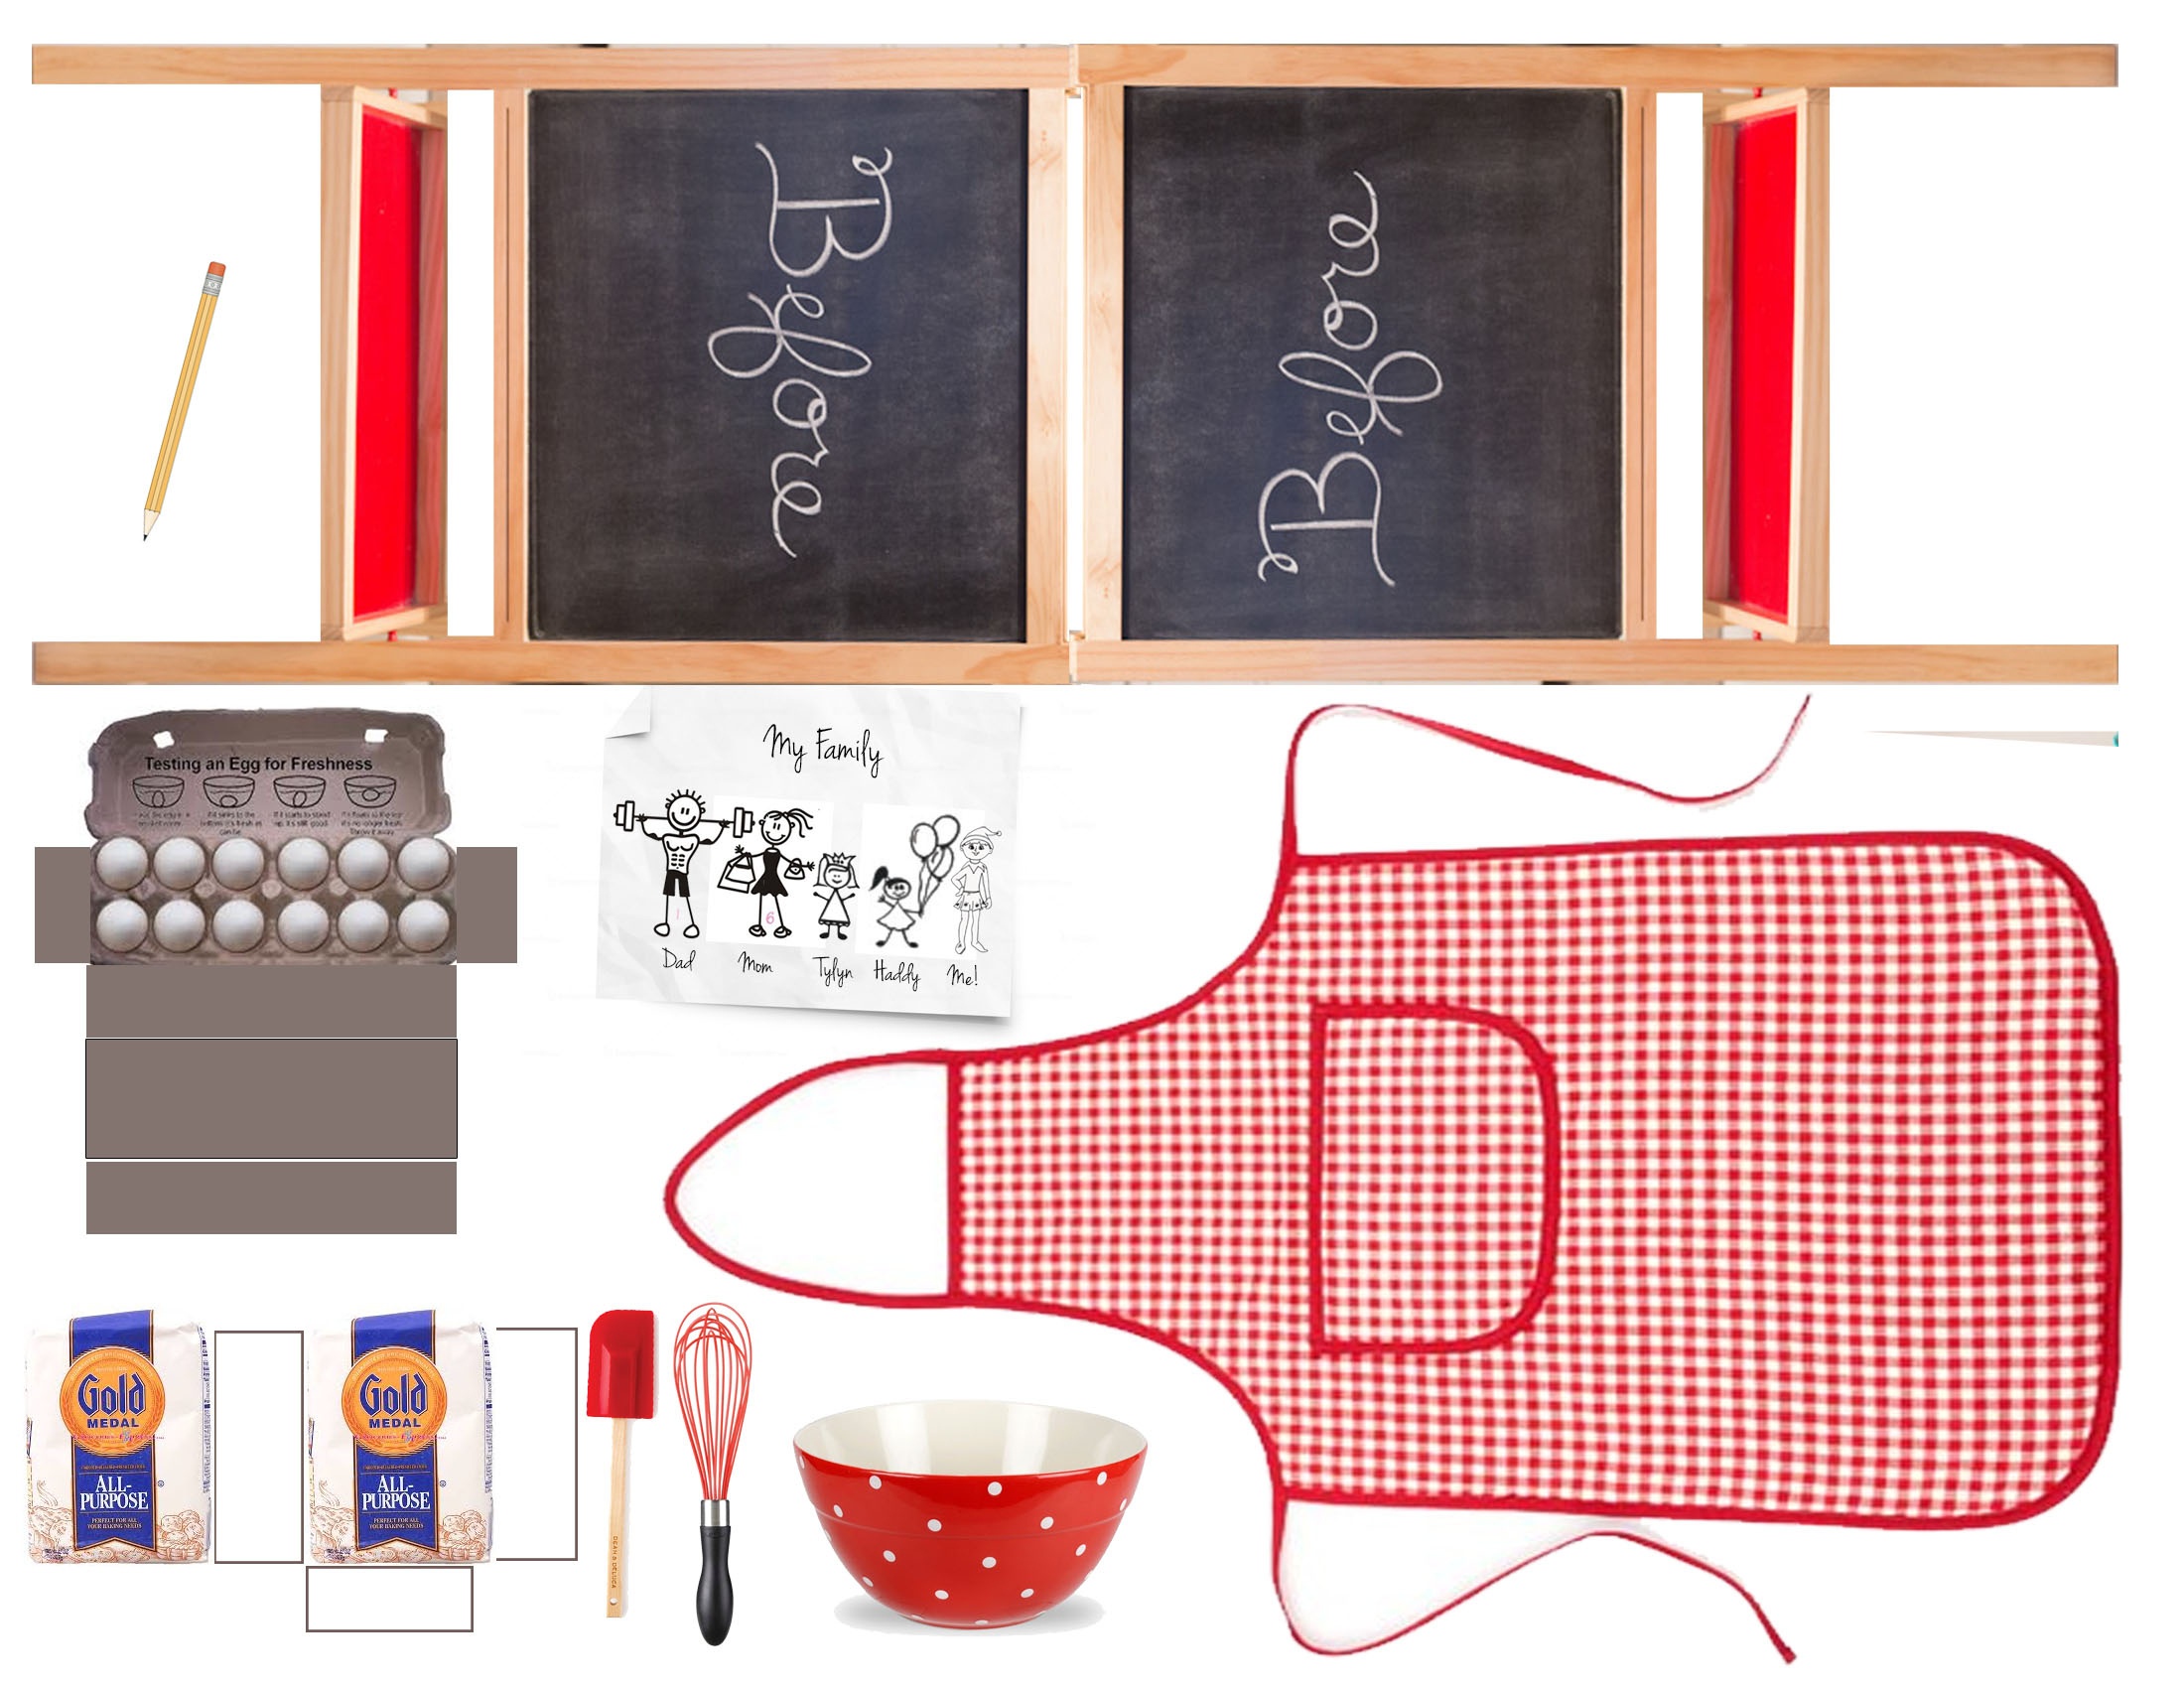 Elf On The Shelf Free Printable Props – The Glamorous Project - Elf On The Shelf Printable Props Free